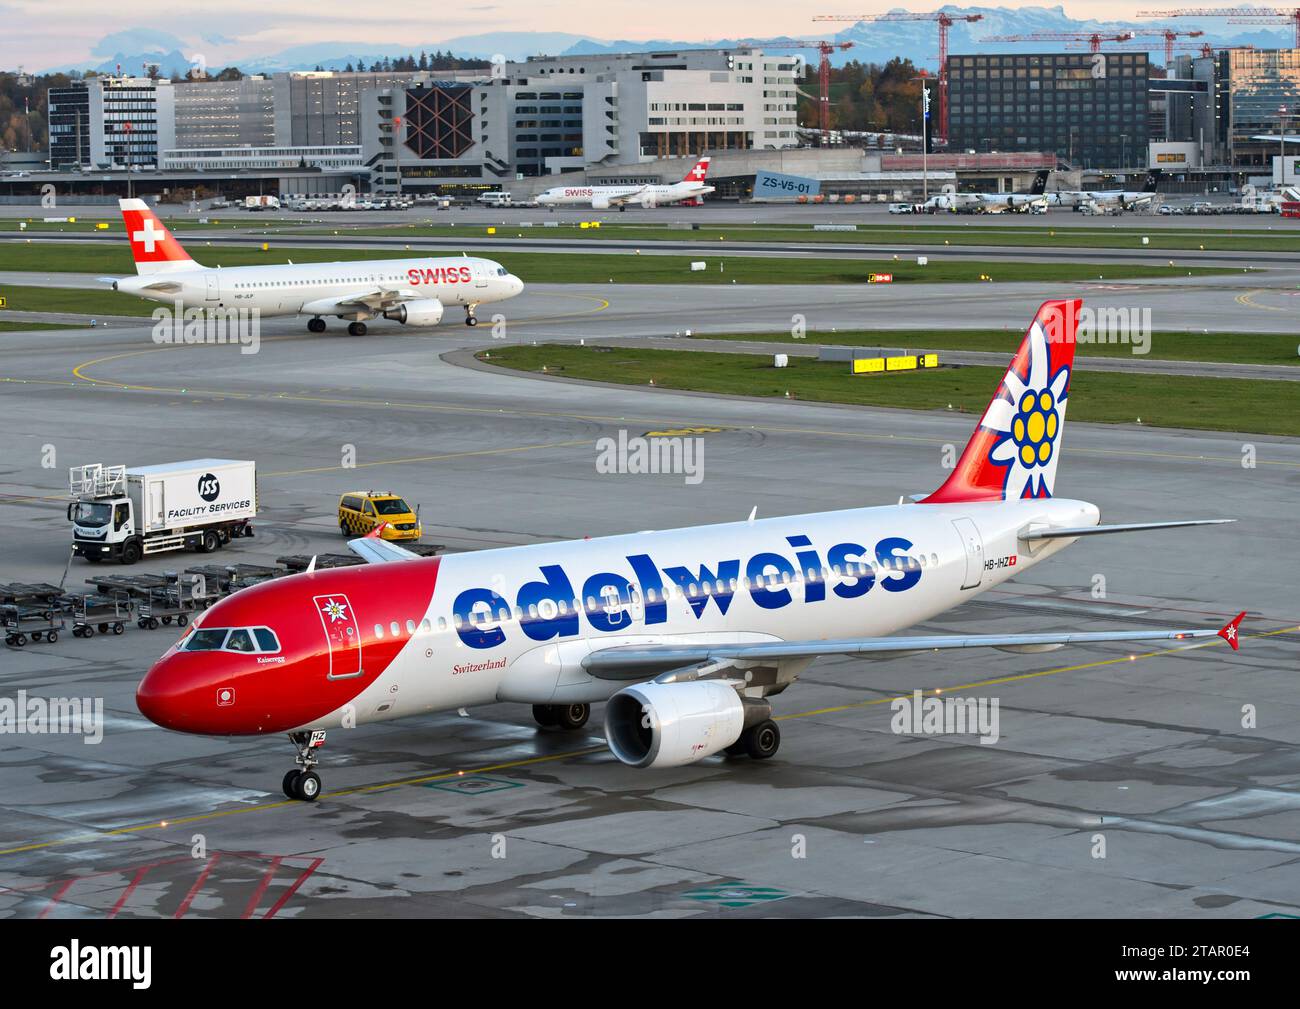 Airbus of the Swiss leisure airline Edelweiss Air, behind an aircraft of Swiss International Air Lines on the runway, Zurich Airport, Switzerland Stock Photo